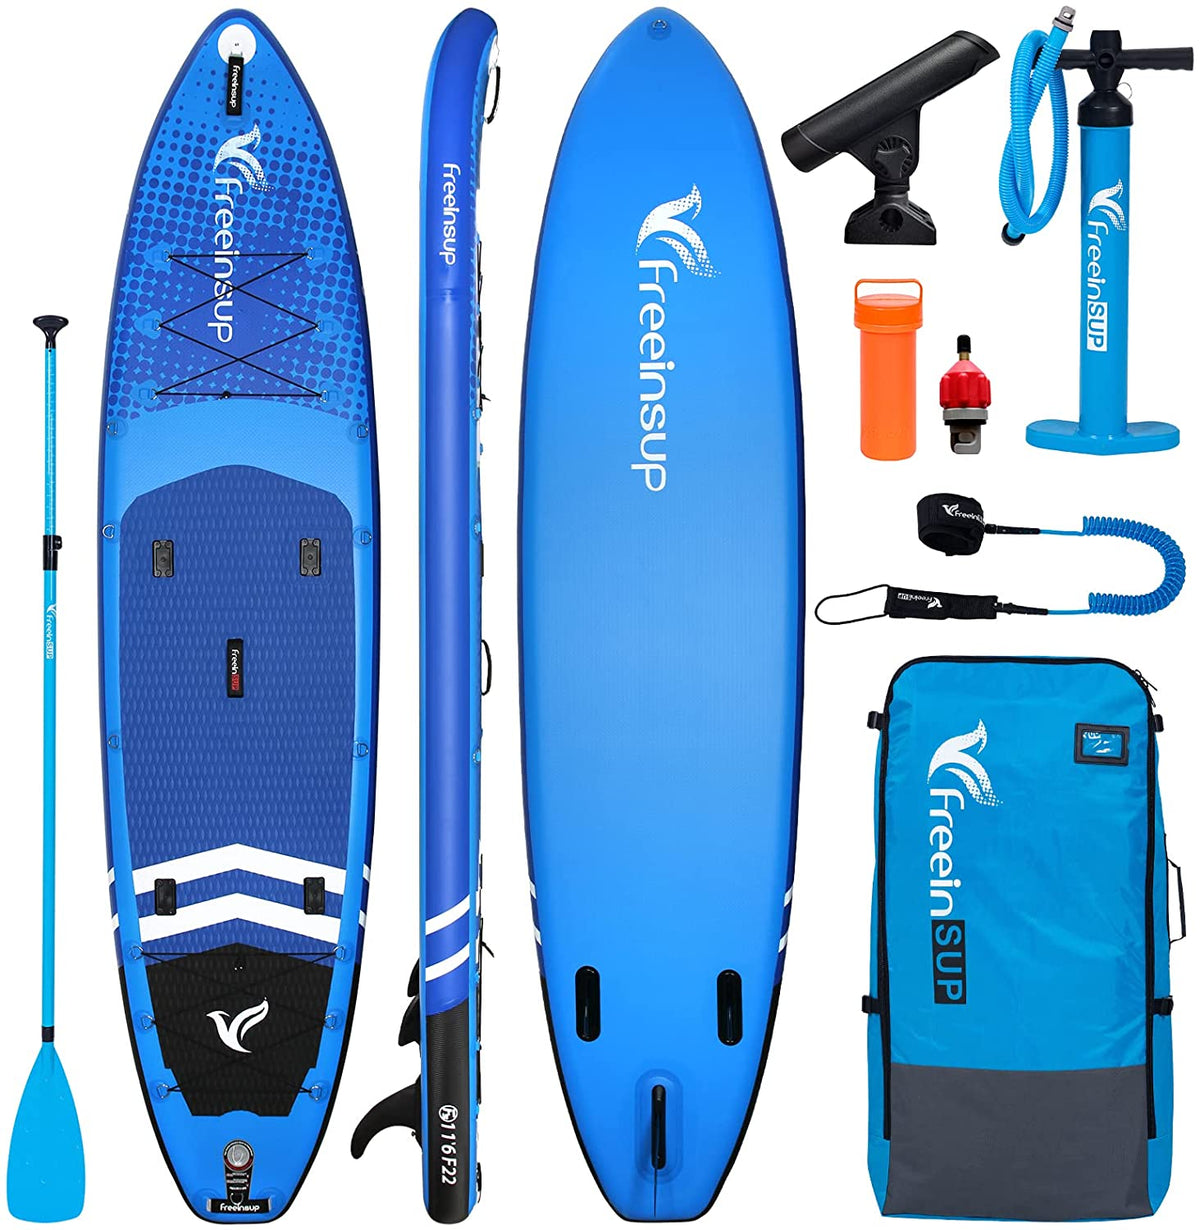 Freein 11’6" Inflatable Fishing SUP with Rod Holders 2022